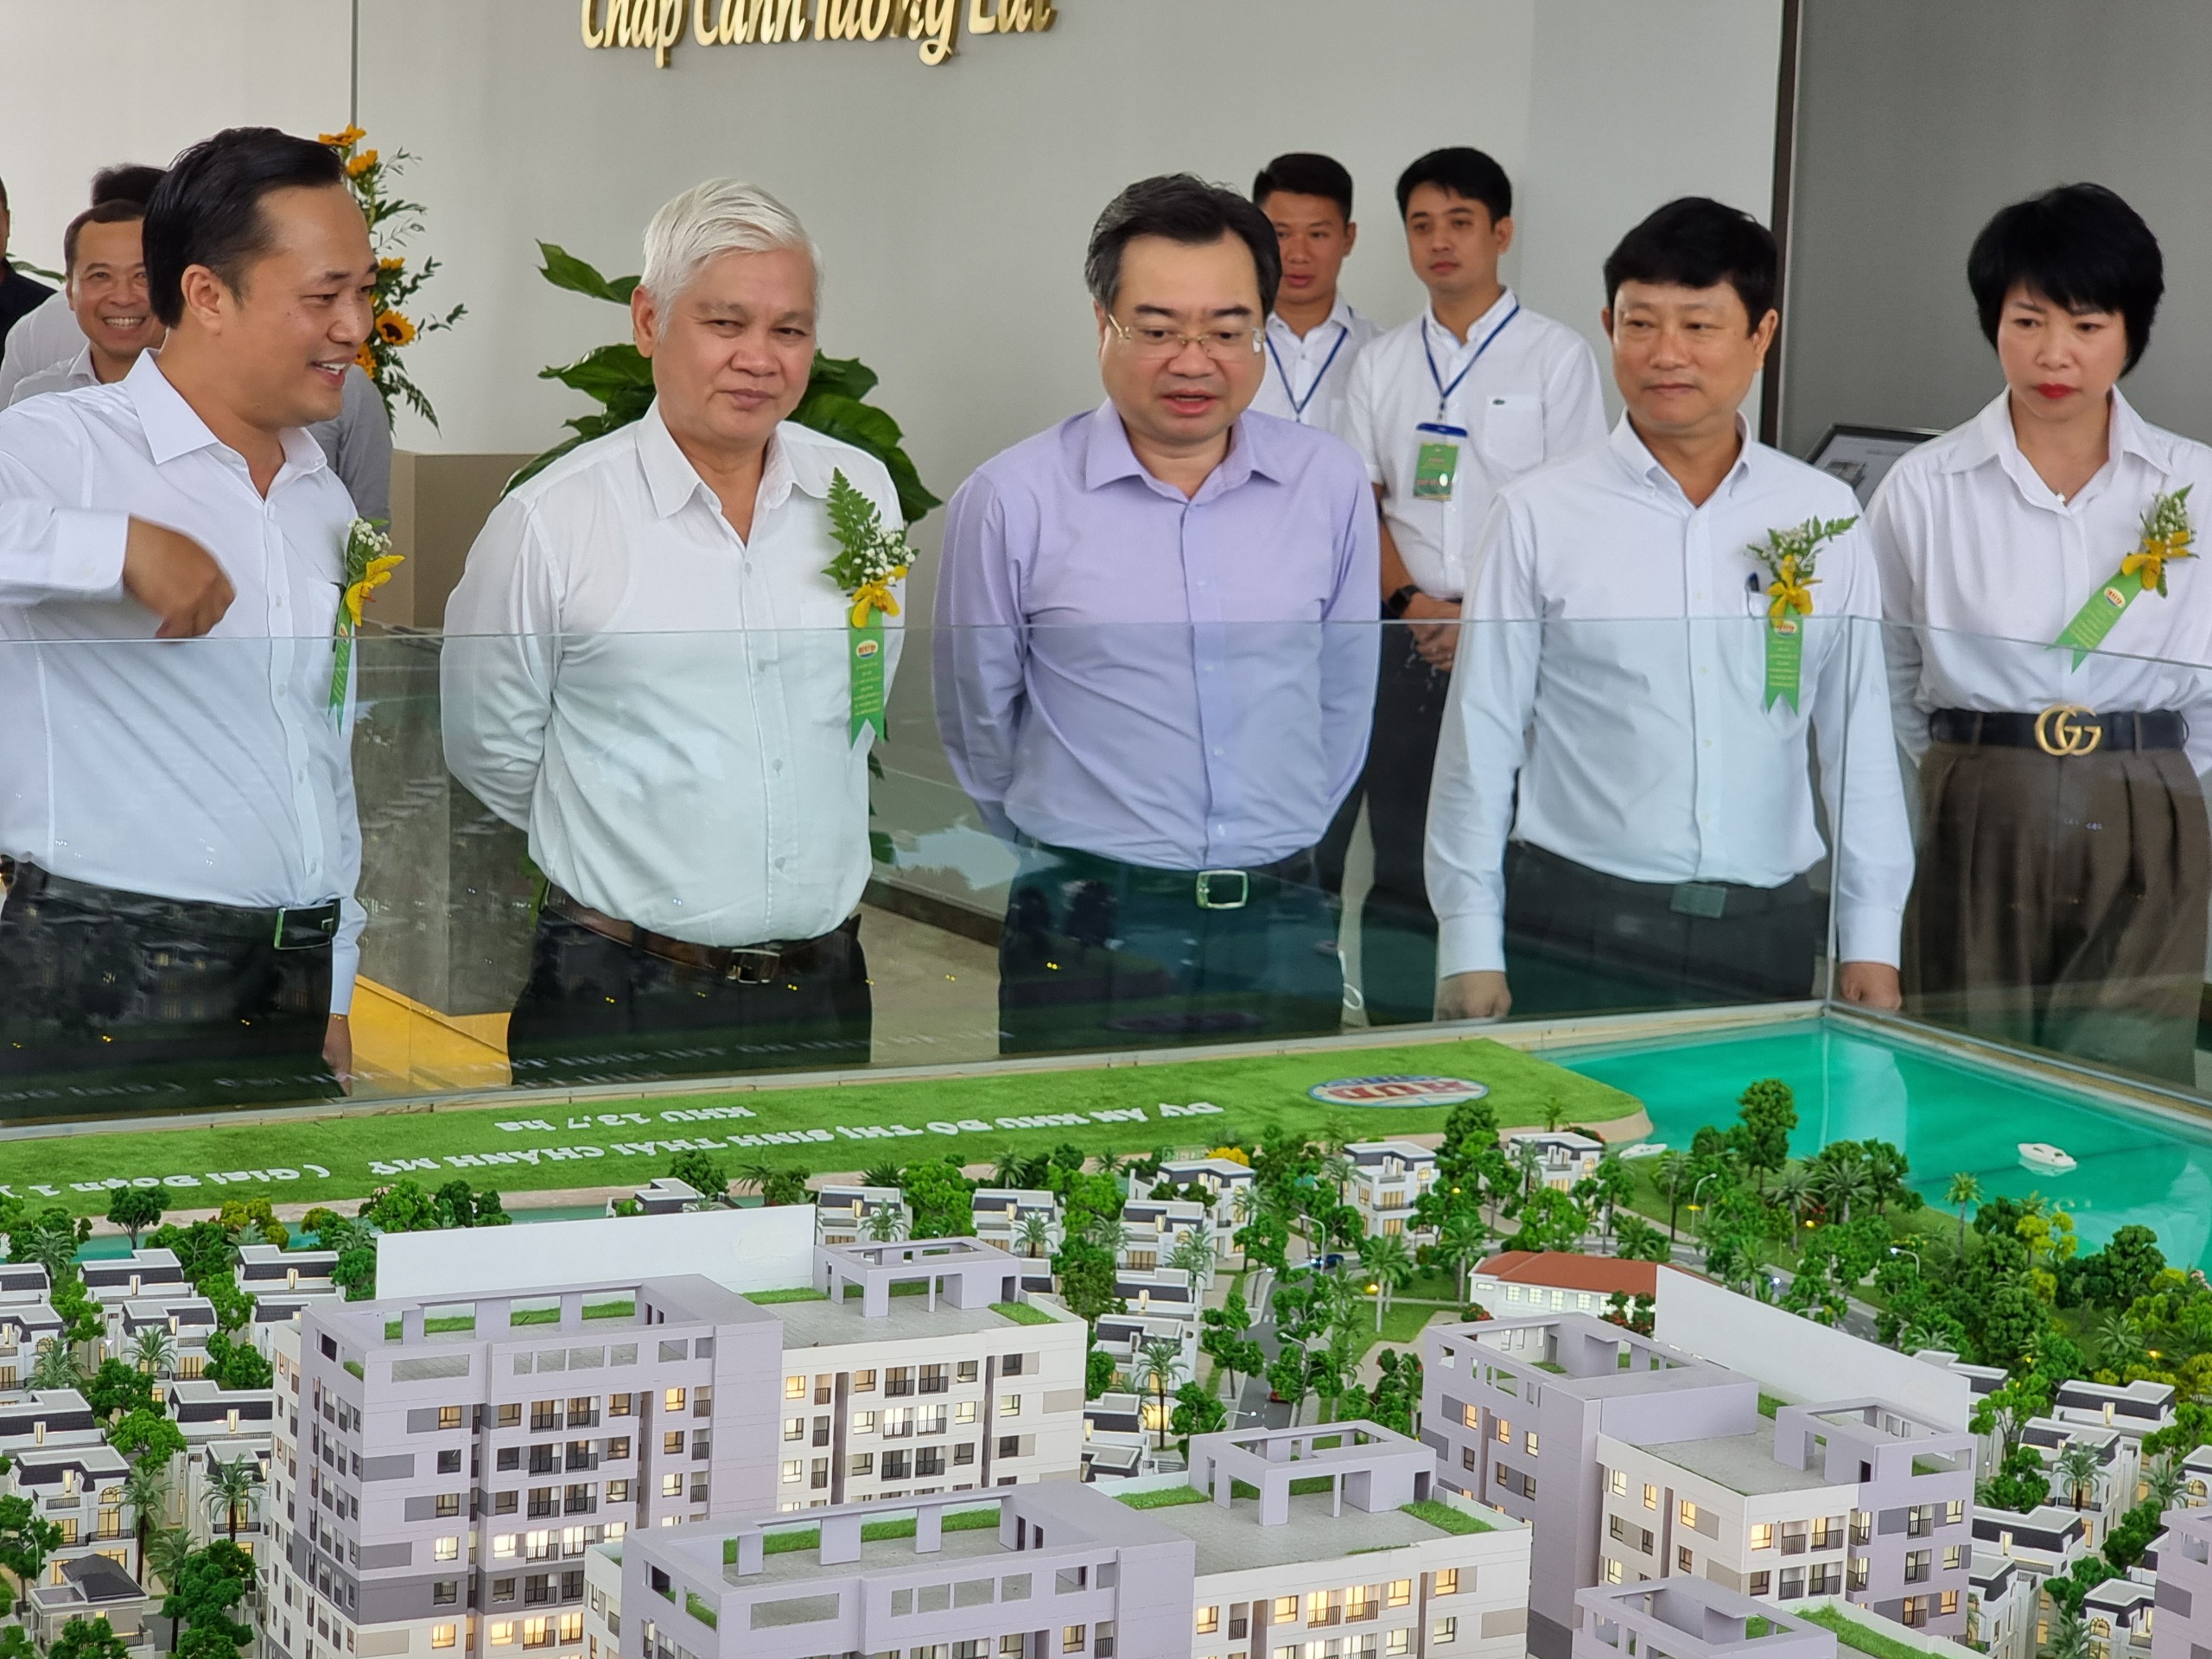 Construction of nearly 1,000 low-cost apartments kicks off in Vietnam’s Binh Duong